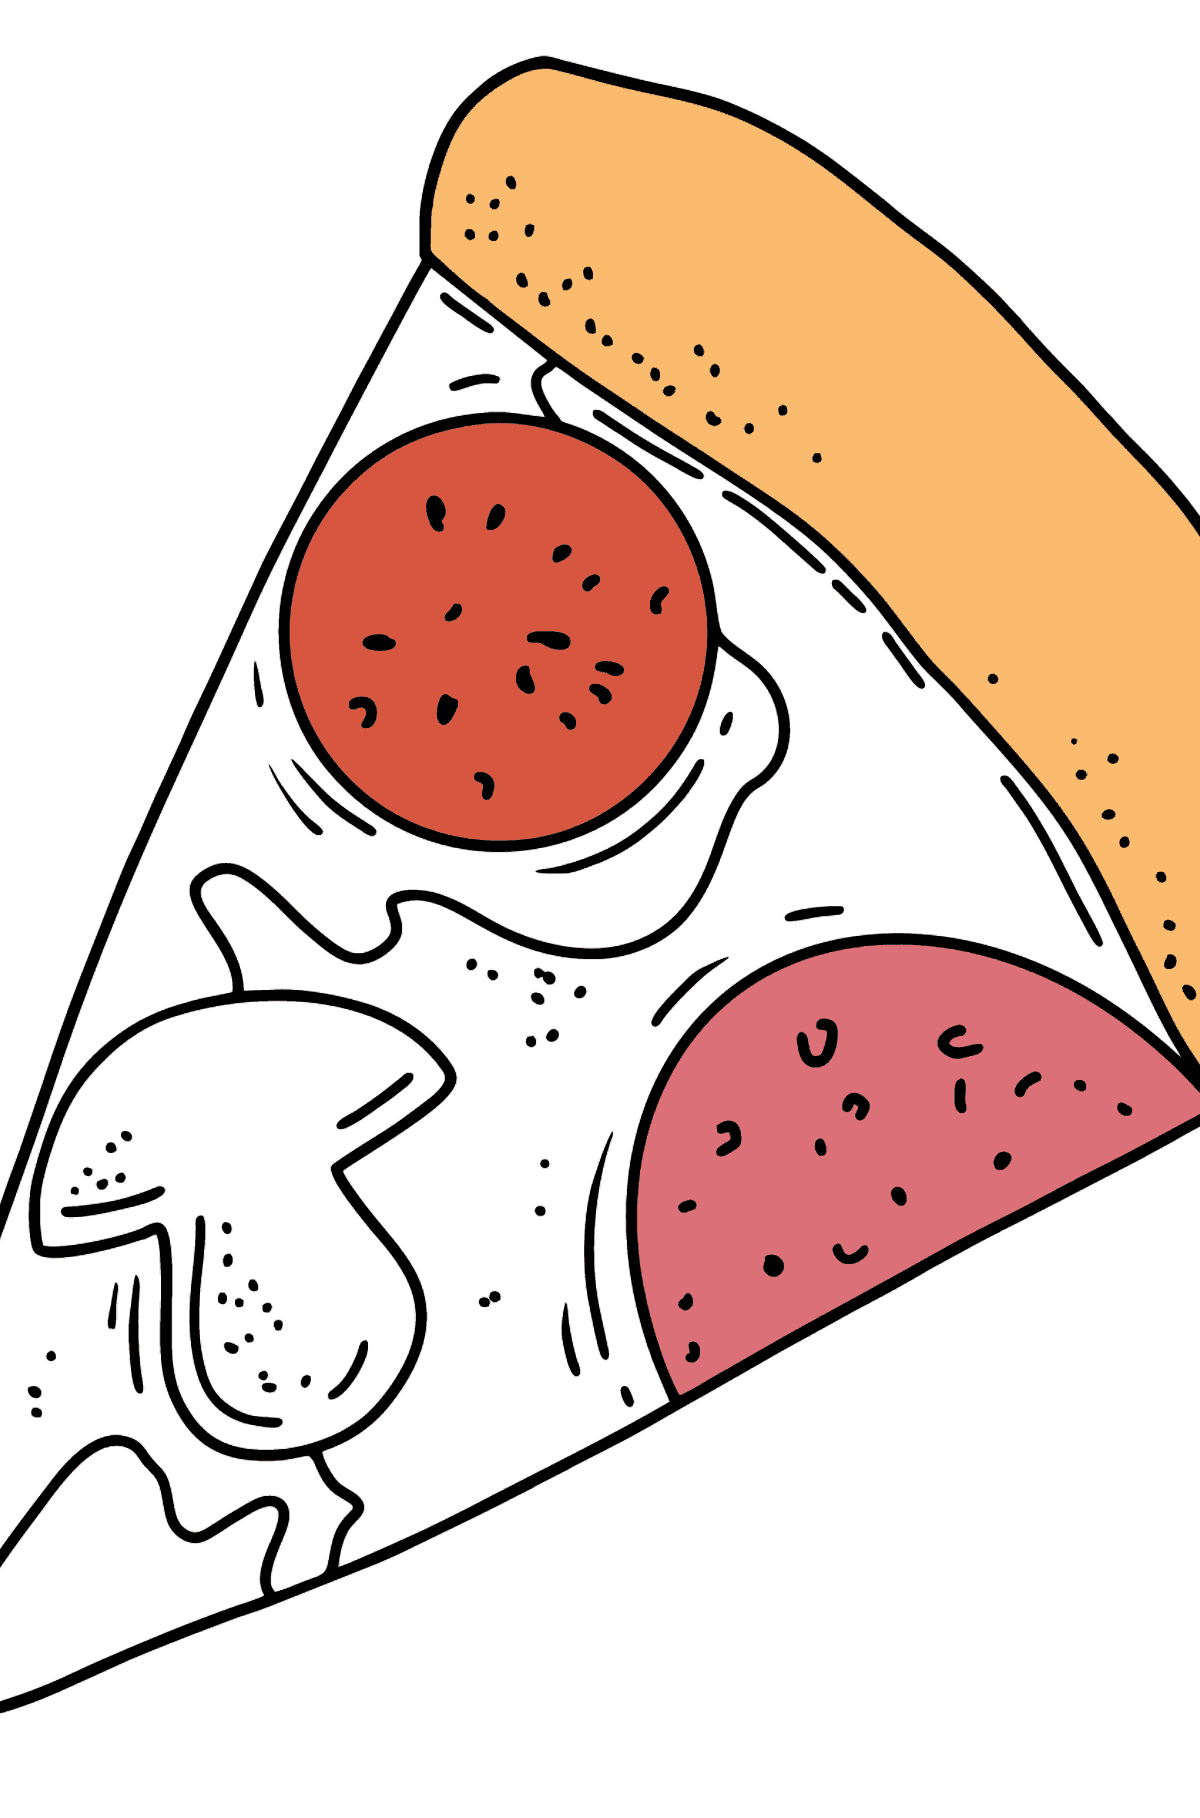 Salami Pizza and Mushrooms coloring page - Coloring Pages for Kids